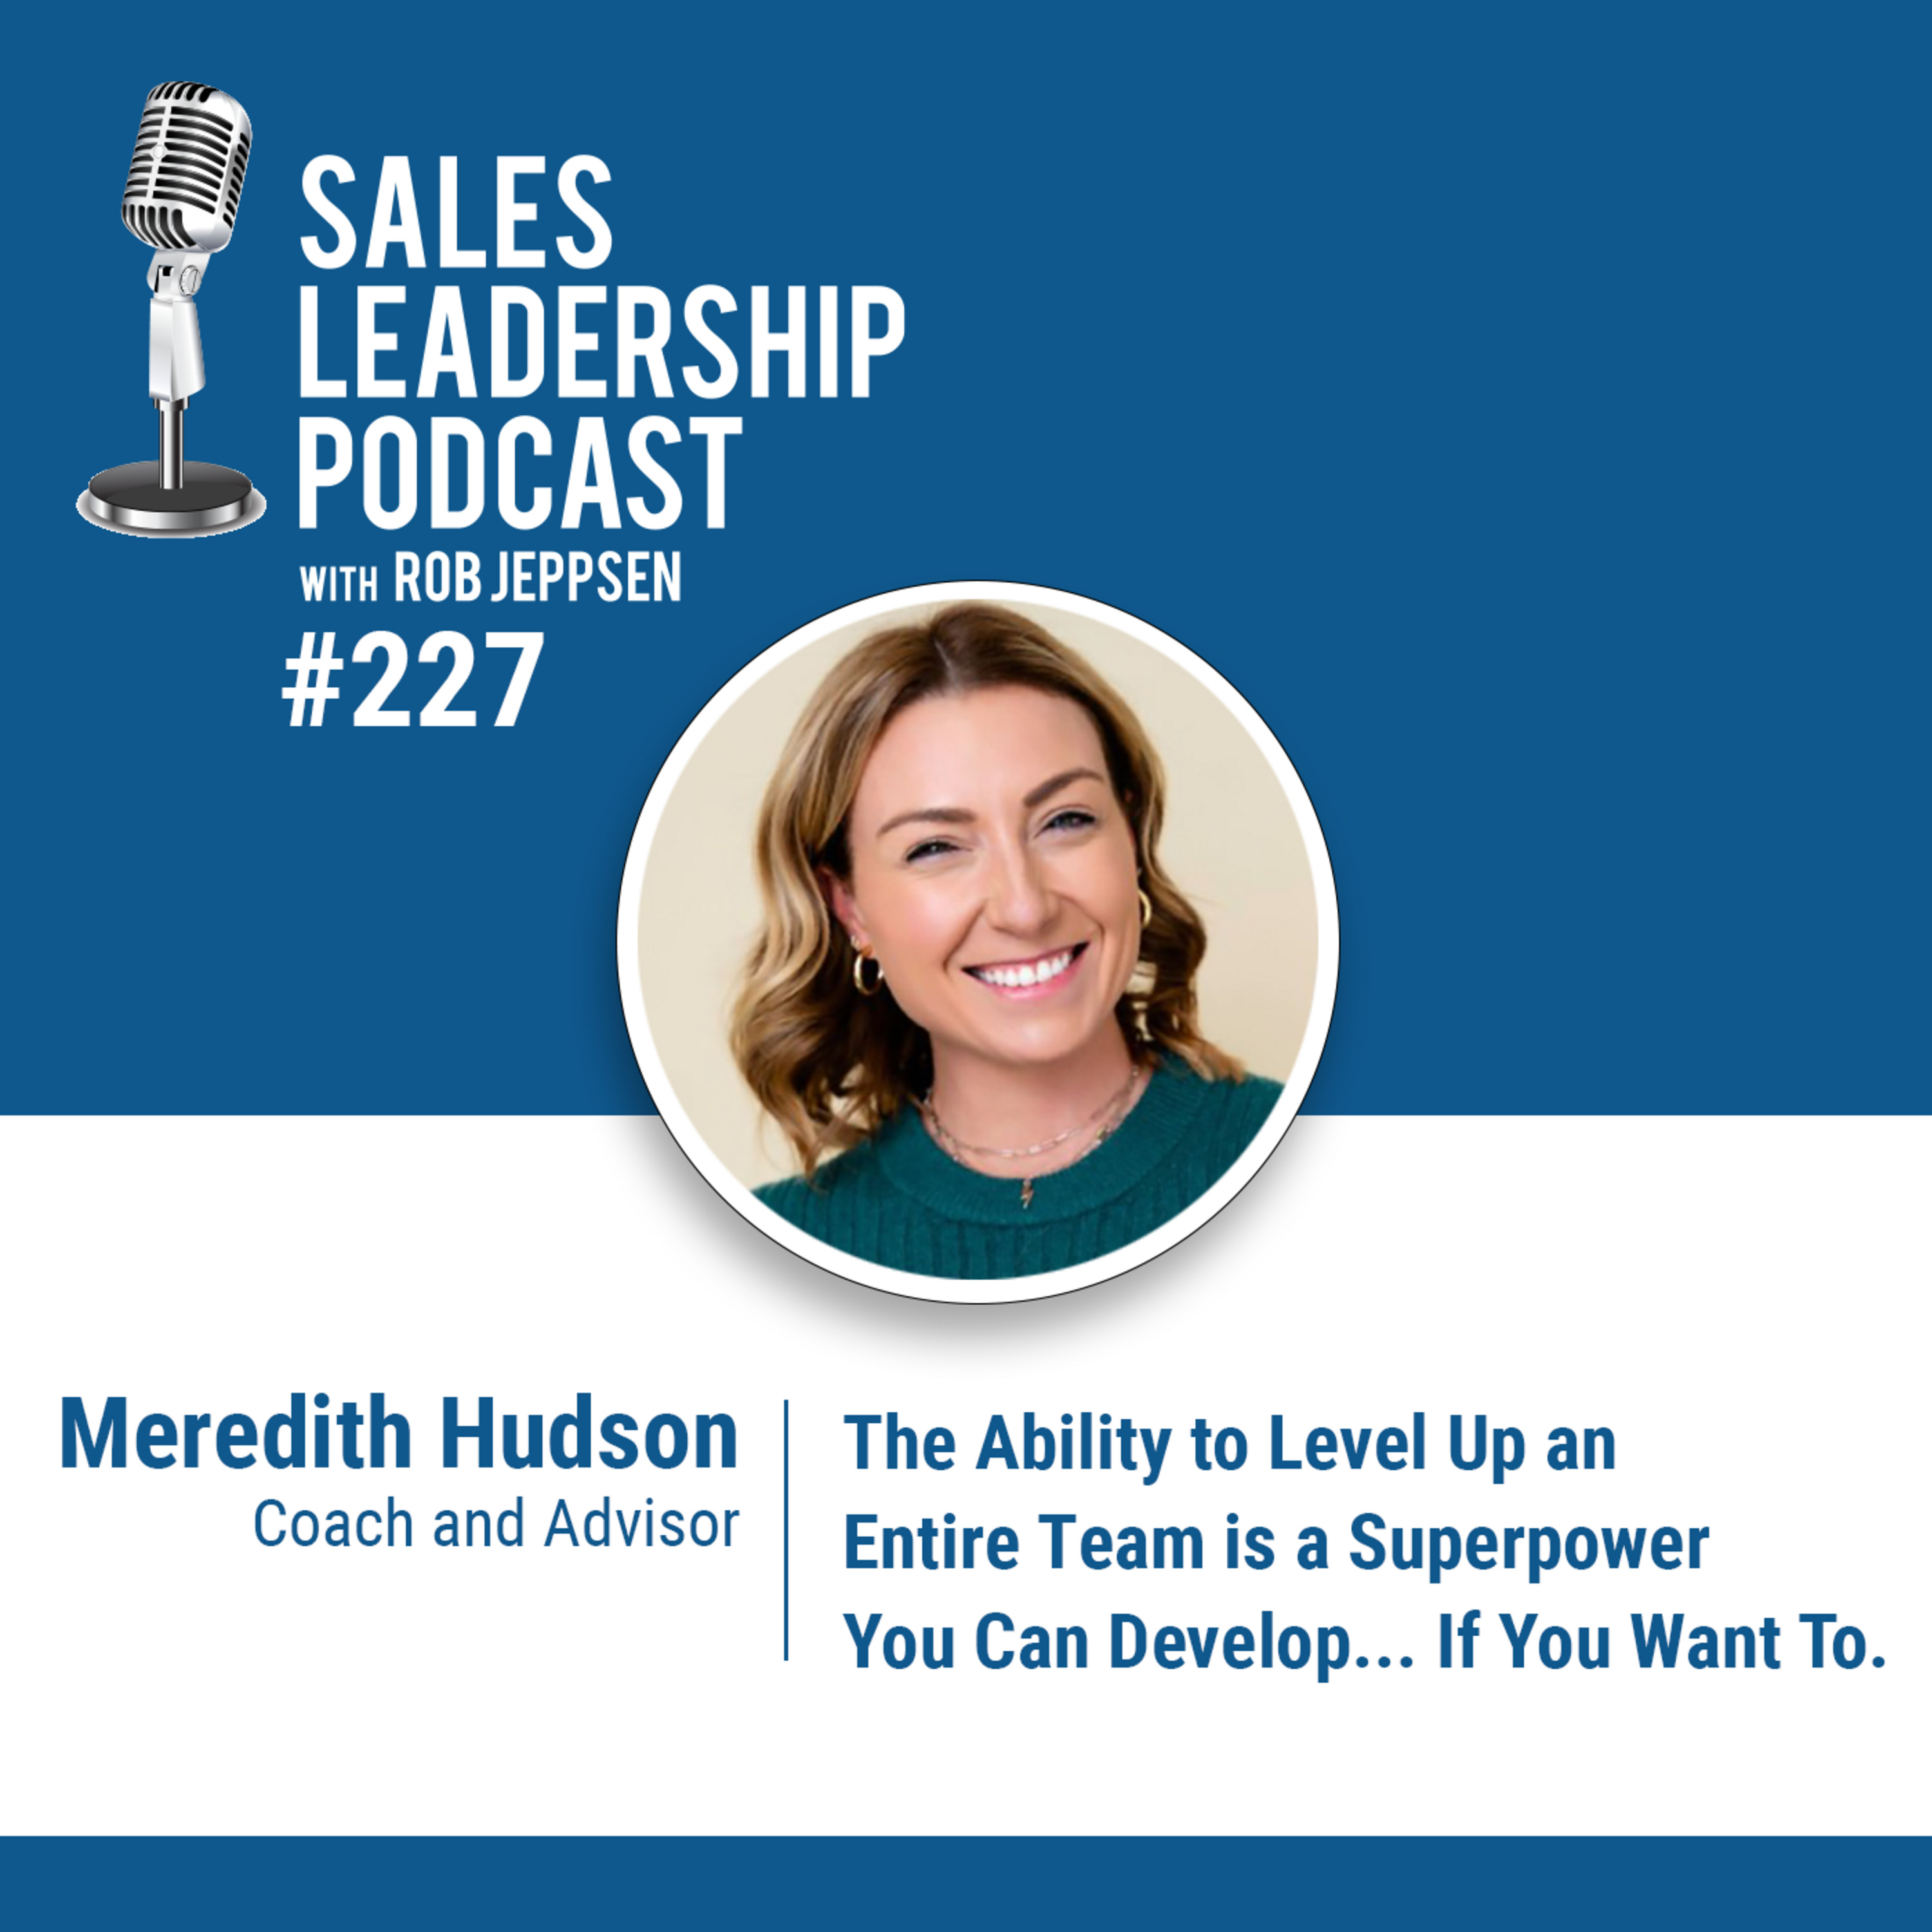 Episode 228: Meredith Hudson, Sales Leadership Coach and Advisor — The Ability to Level Up an Entire Team is a Superpower You Can Develop...if You Want To.